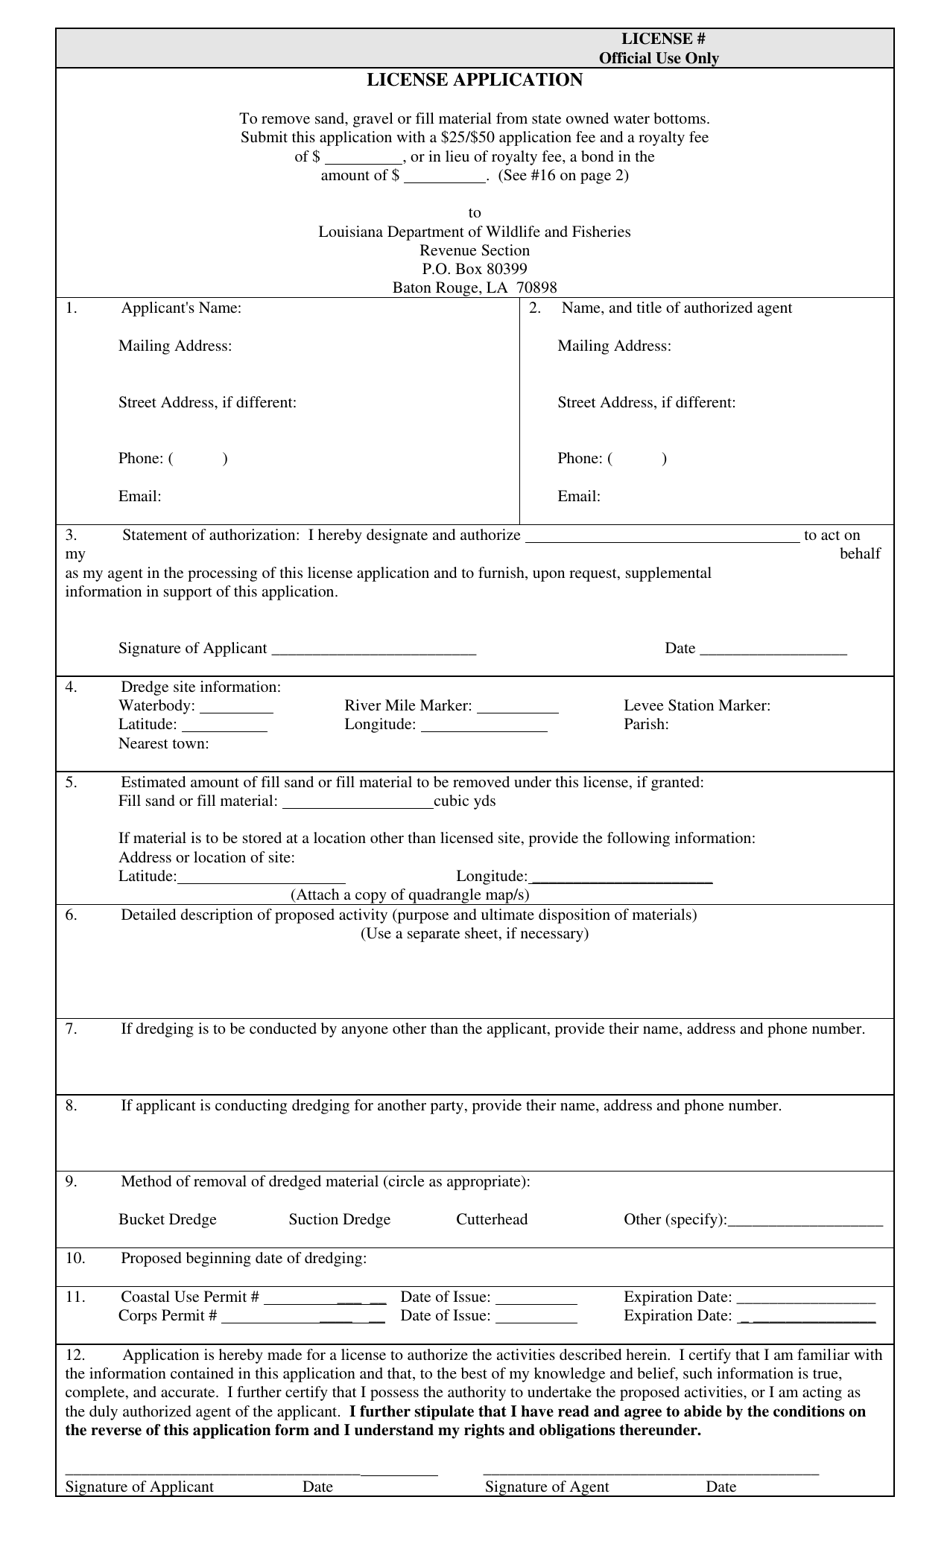 Dredge Fill Material License Application - Louisiana, Page 1